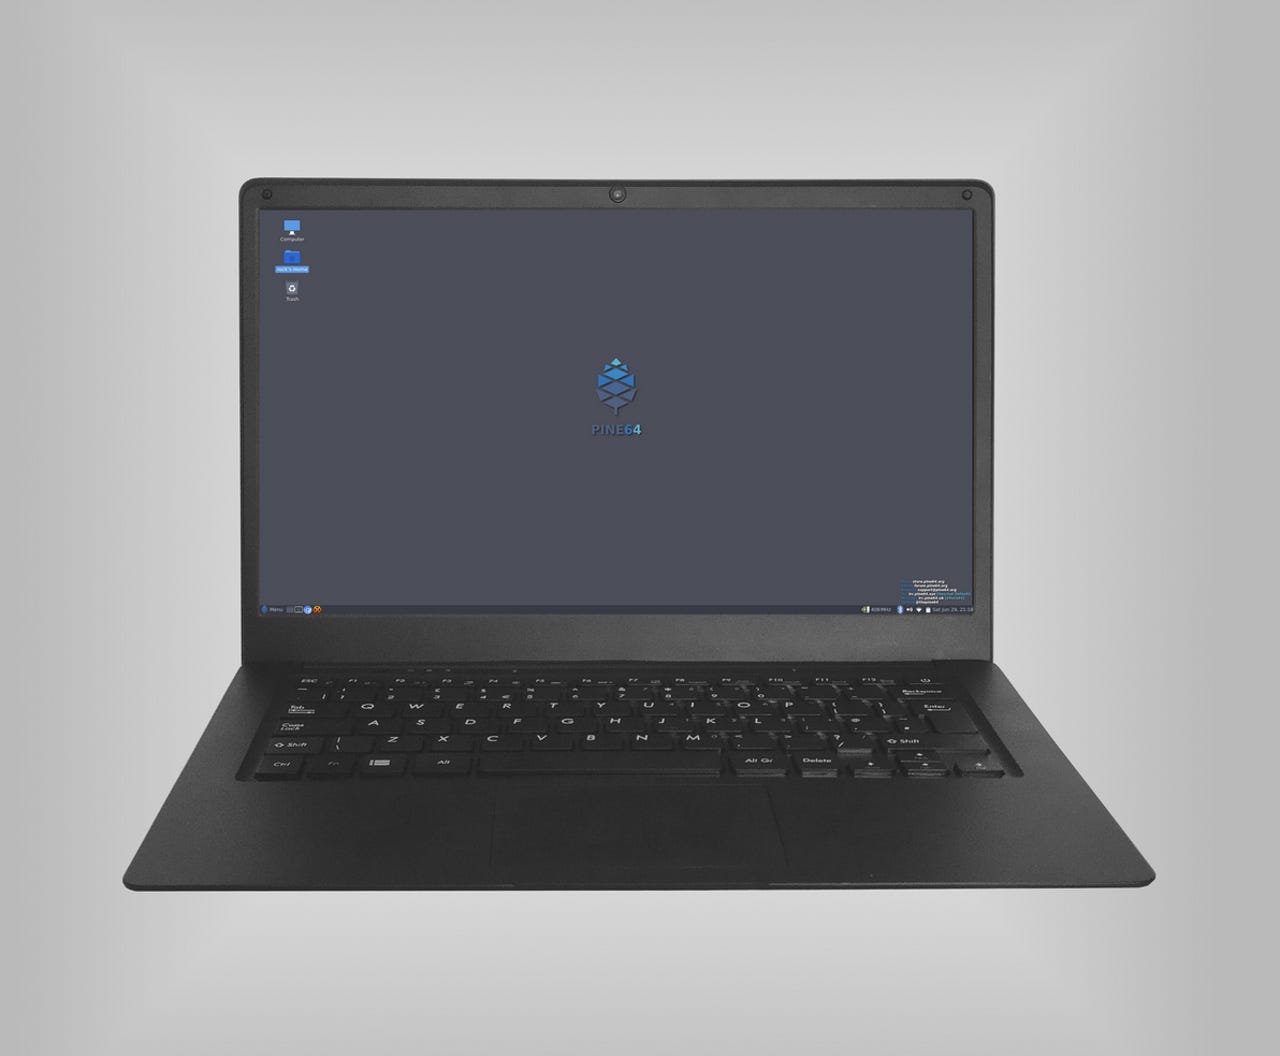 New Raspberry Pi laptop rival: $200 Linux-based Pinebook Pro